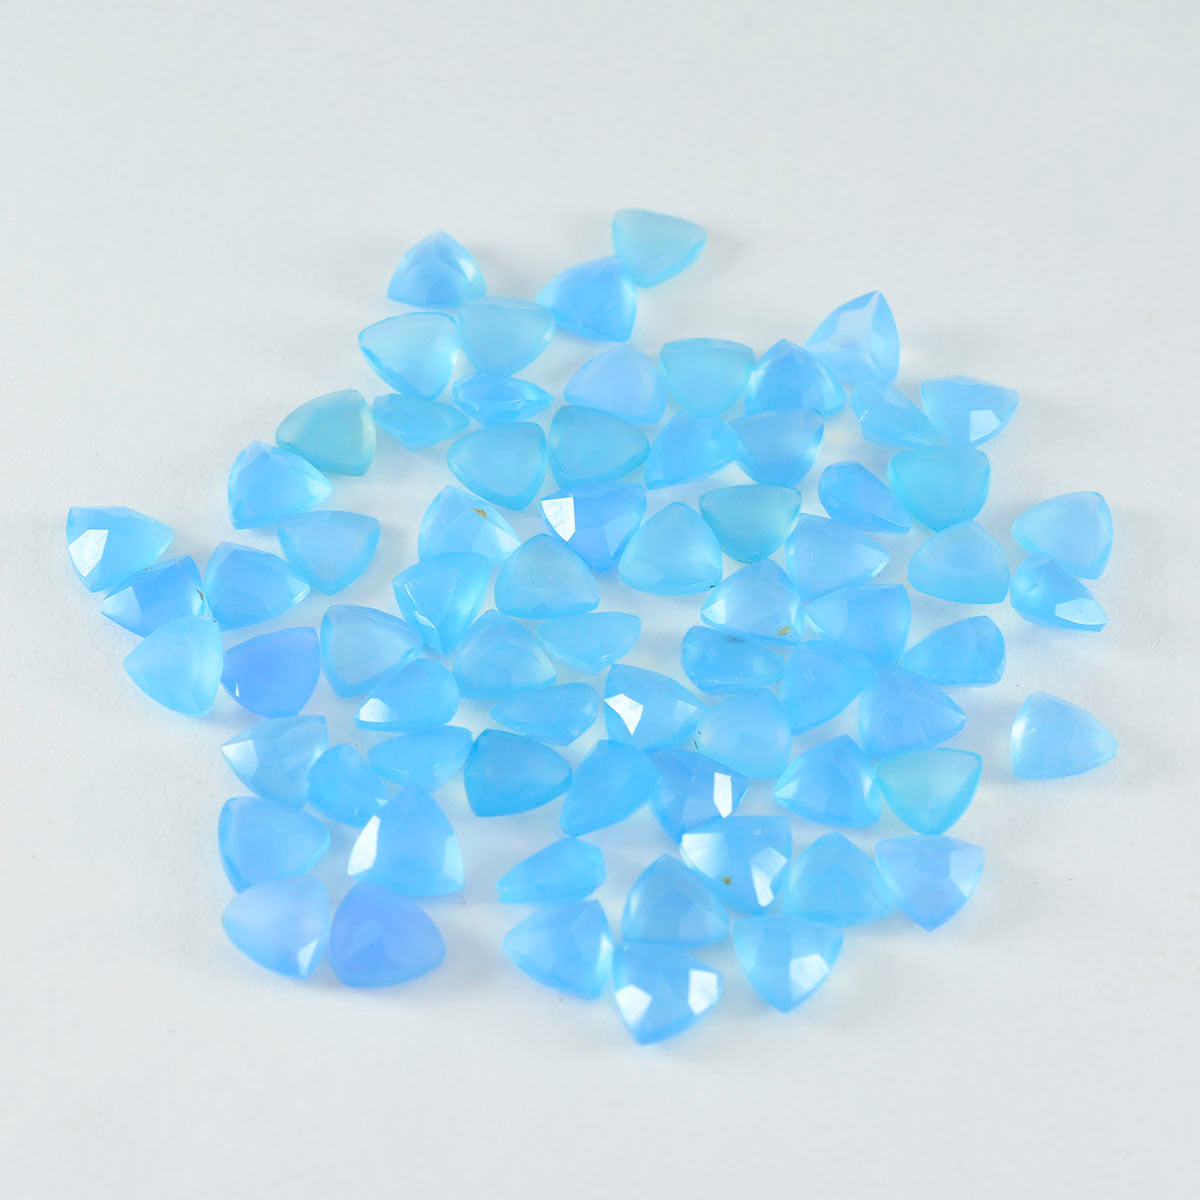 Riyogems 1PC Genuine Blue Chalcedony Faceted 3x3 mm Trillion Shape nice-looking Quality Loose Gems